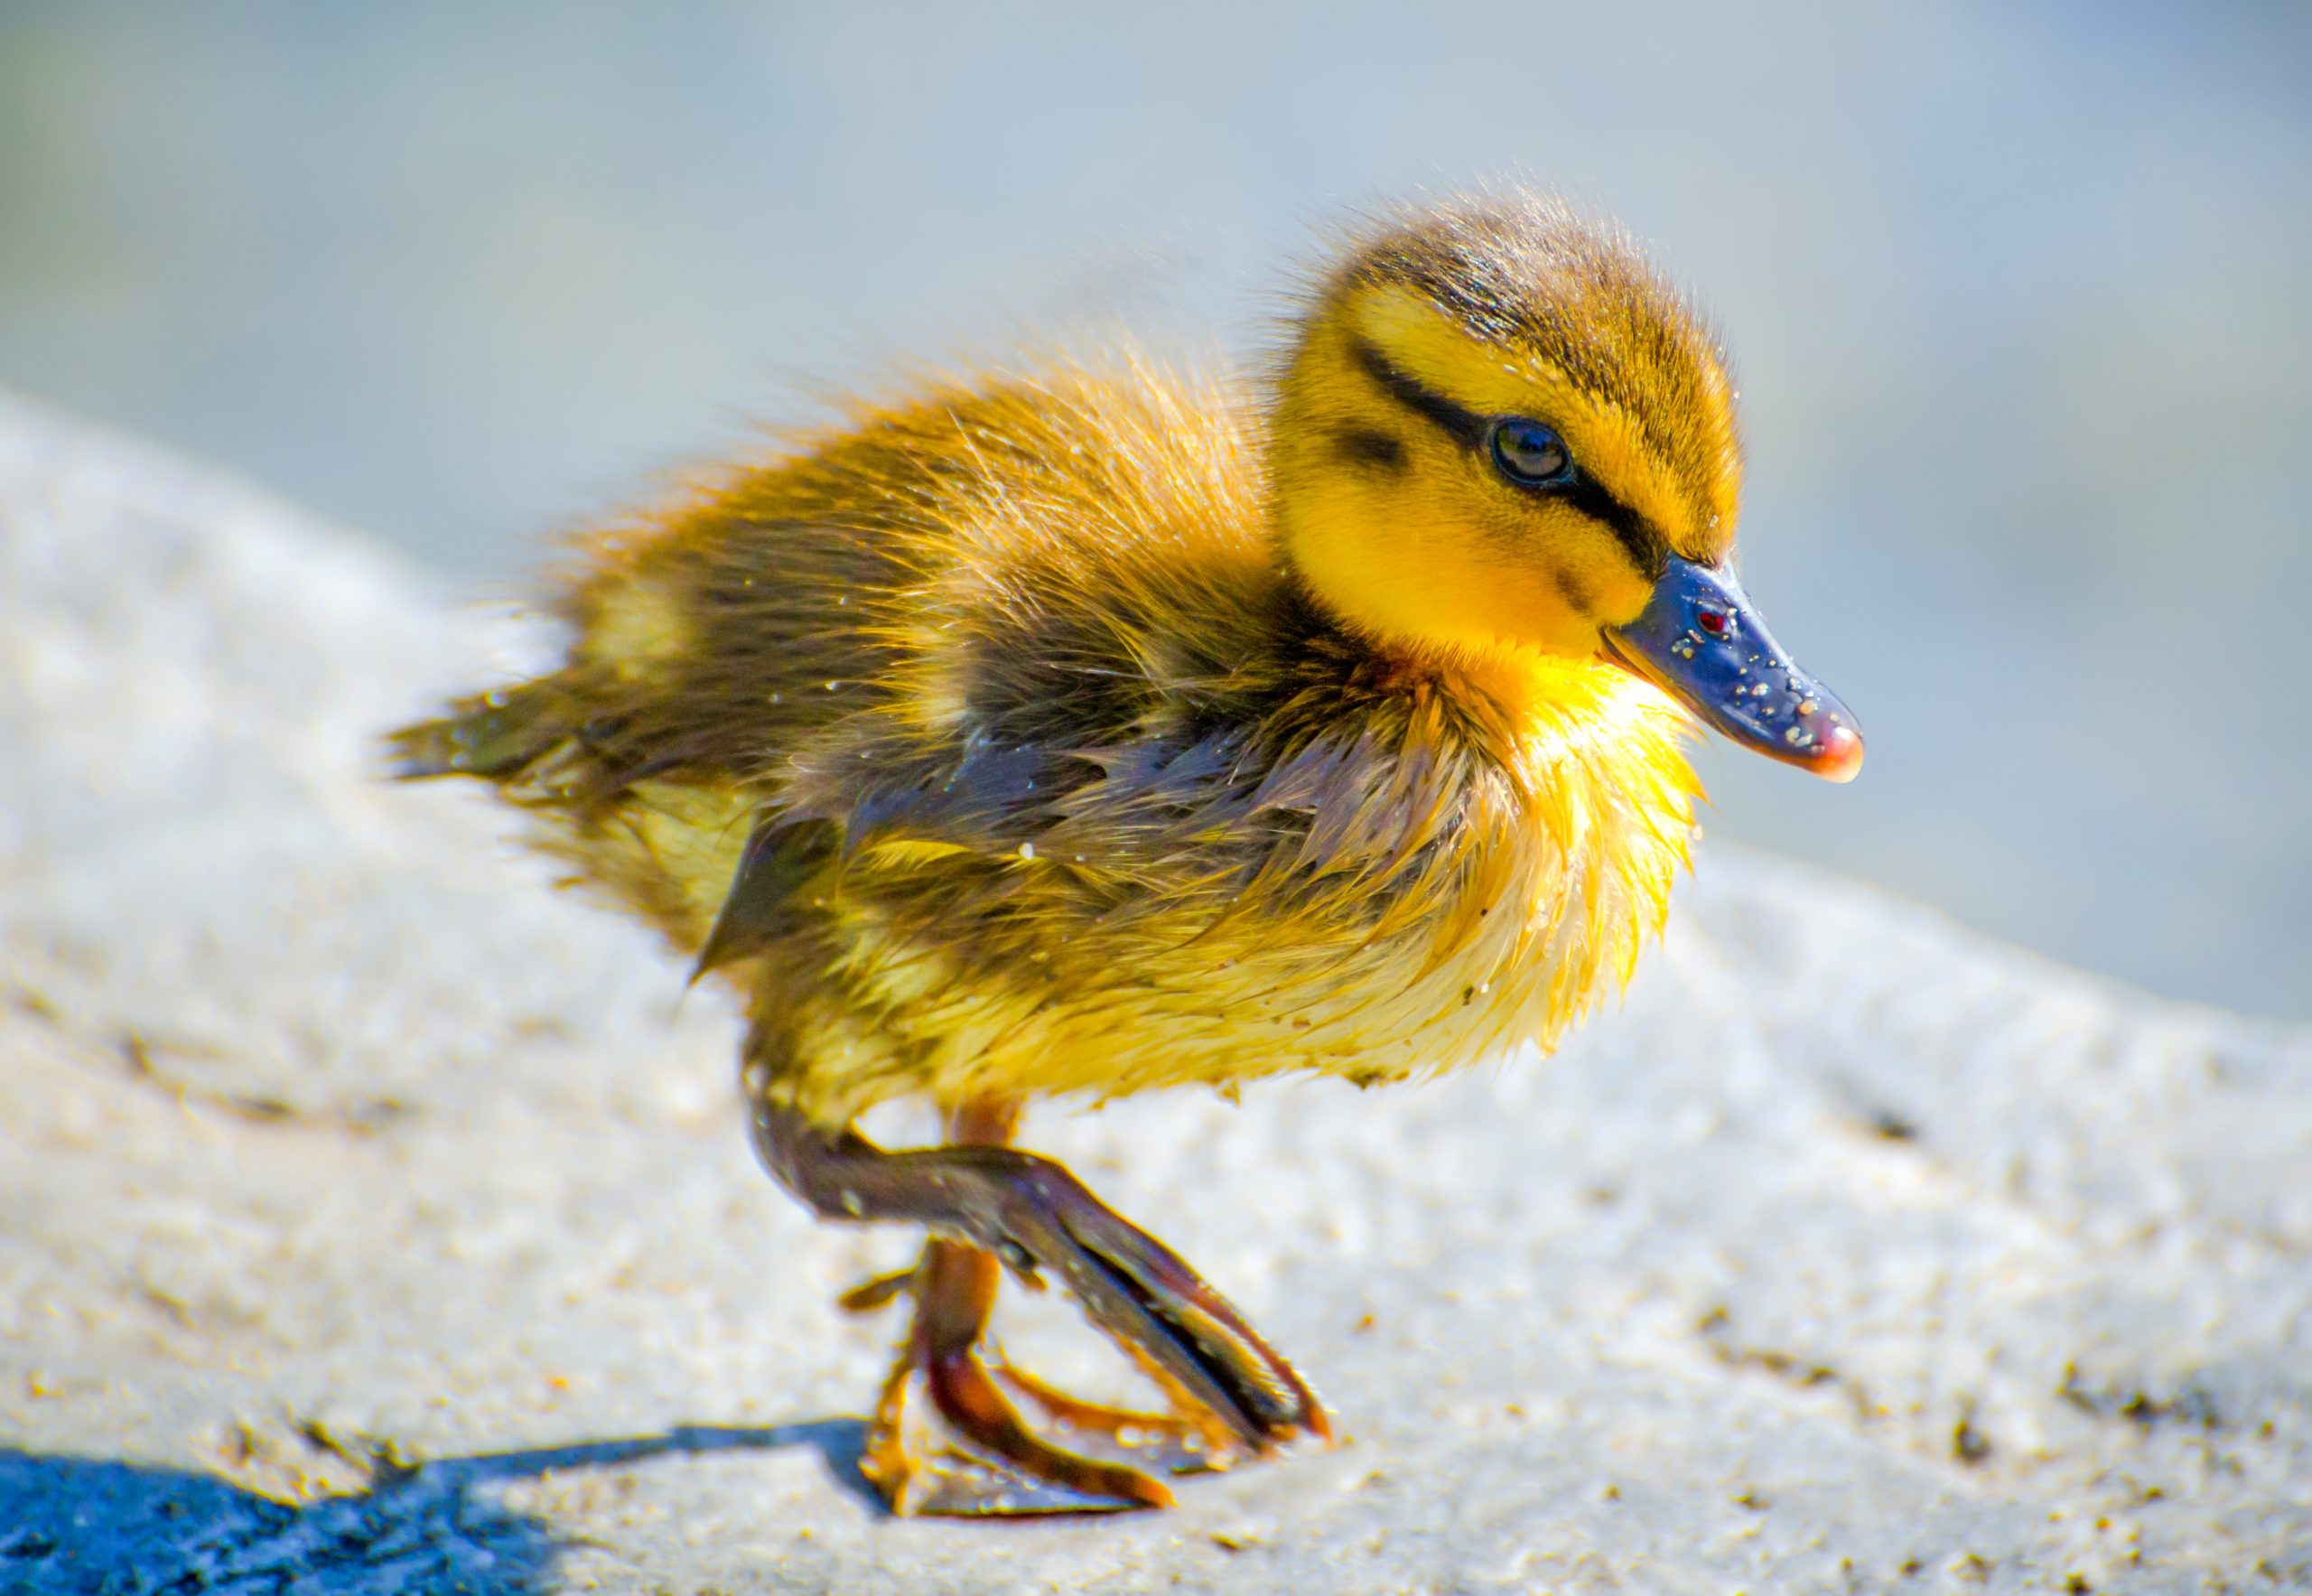 Closeup of a small yellow duck on the ground under the sunlight with a blurry background